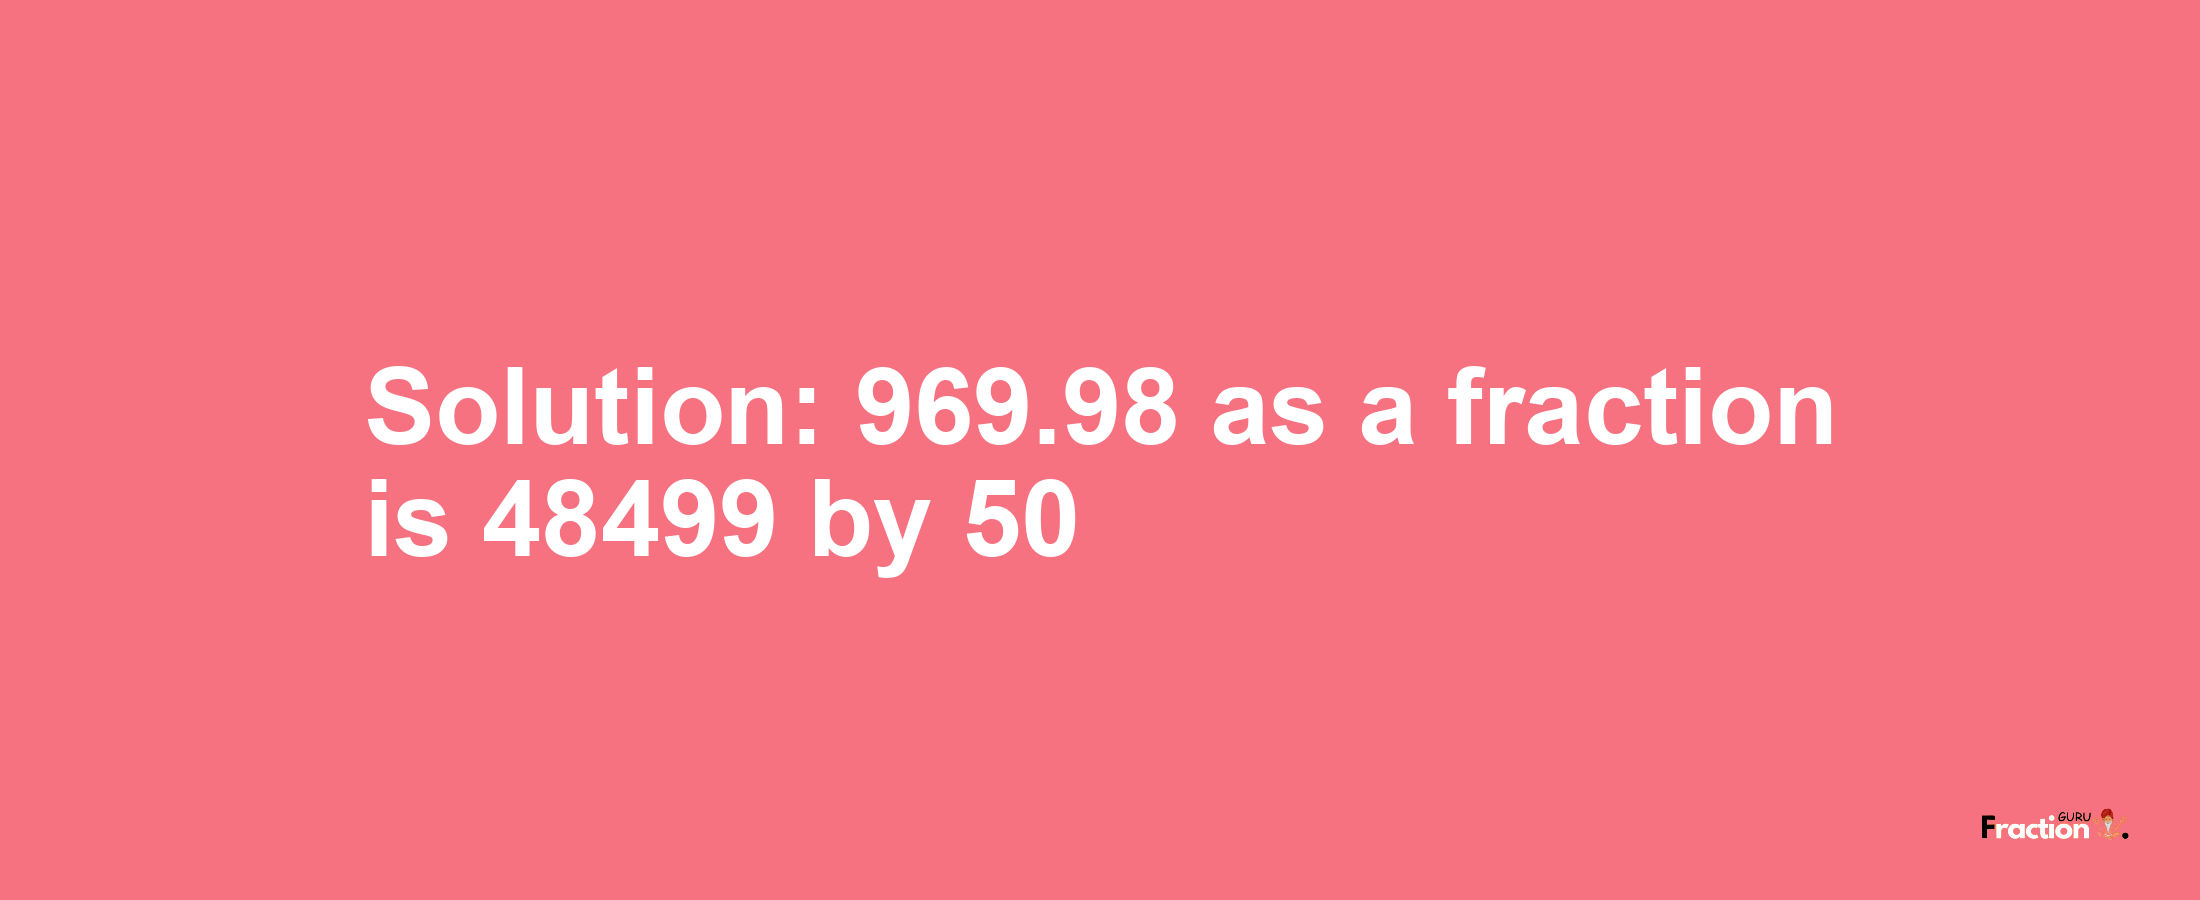 Solution:969.98 as a fraction is 48499/50